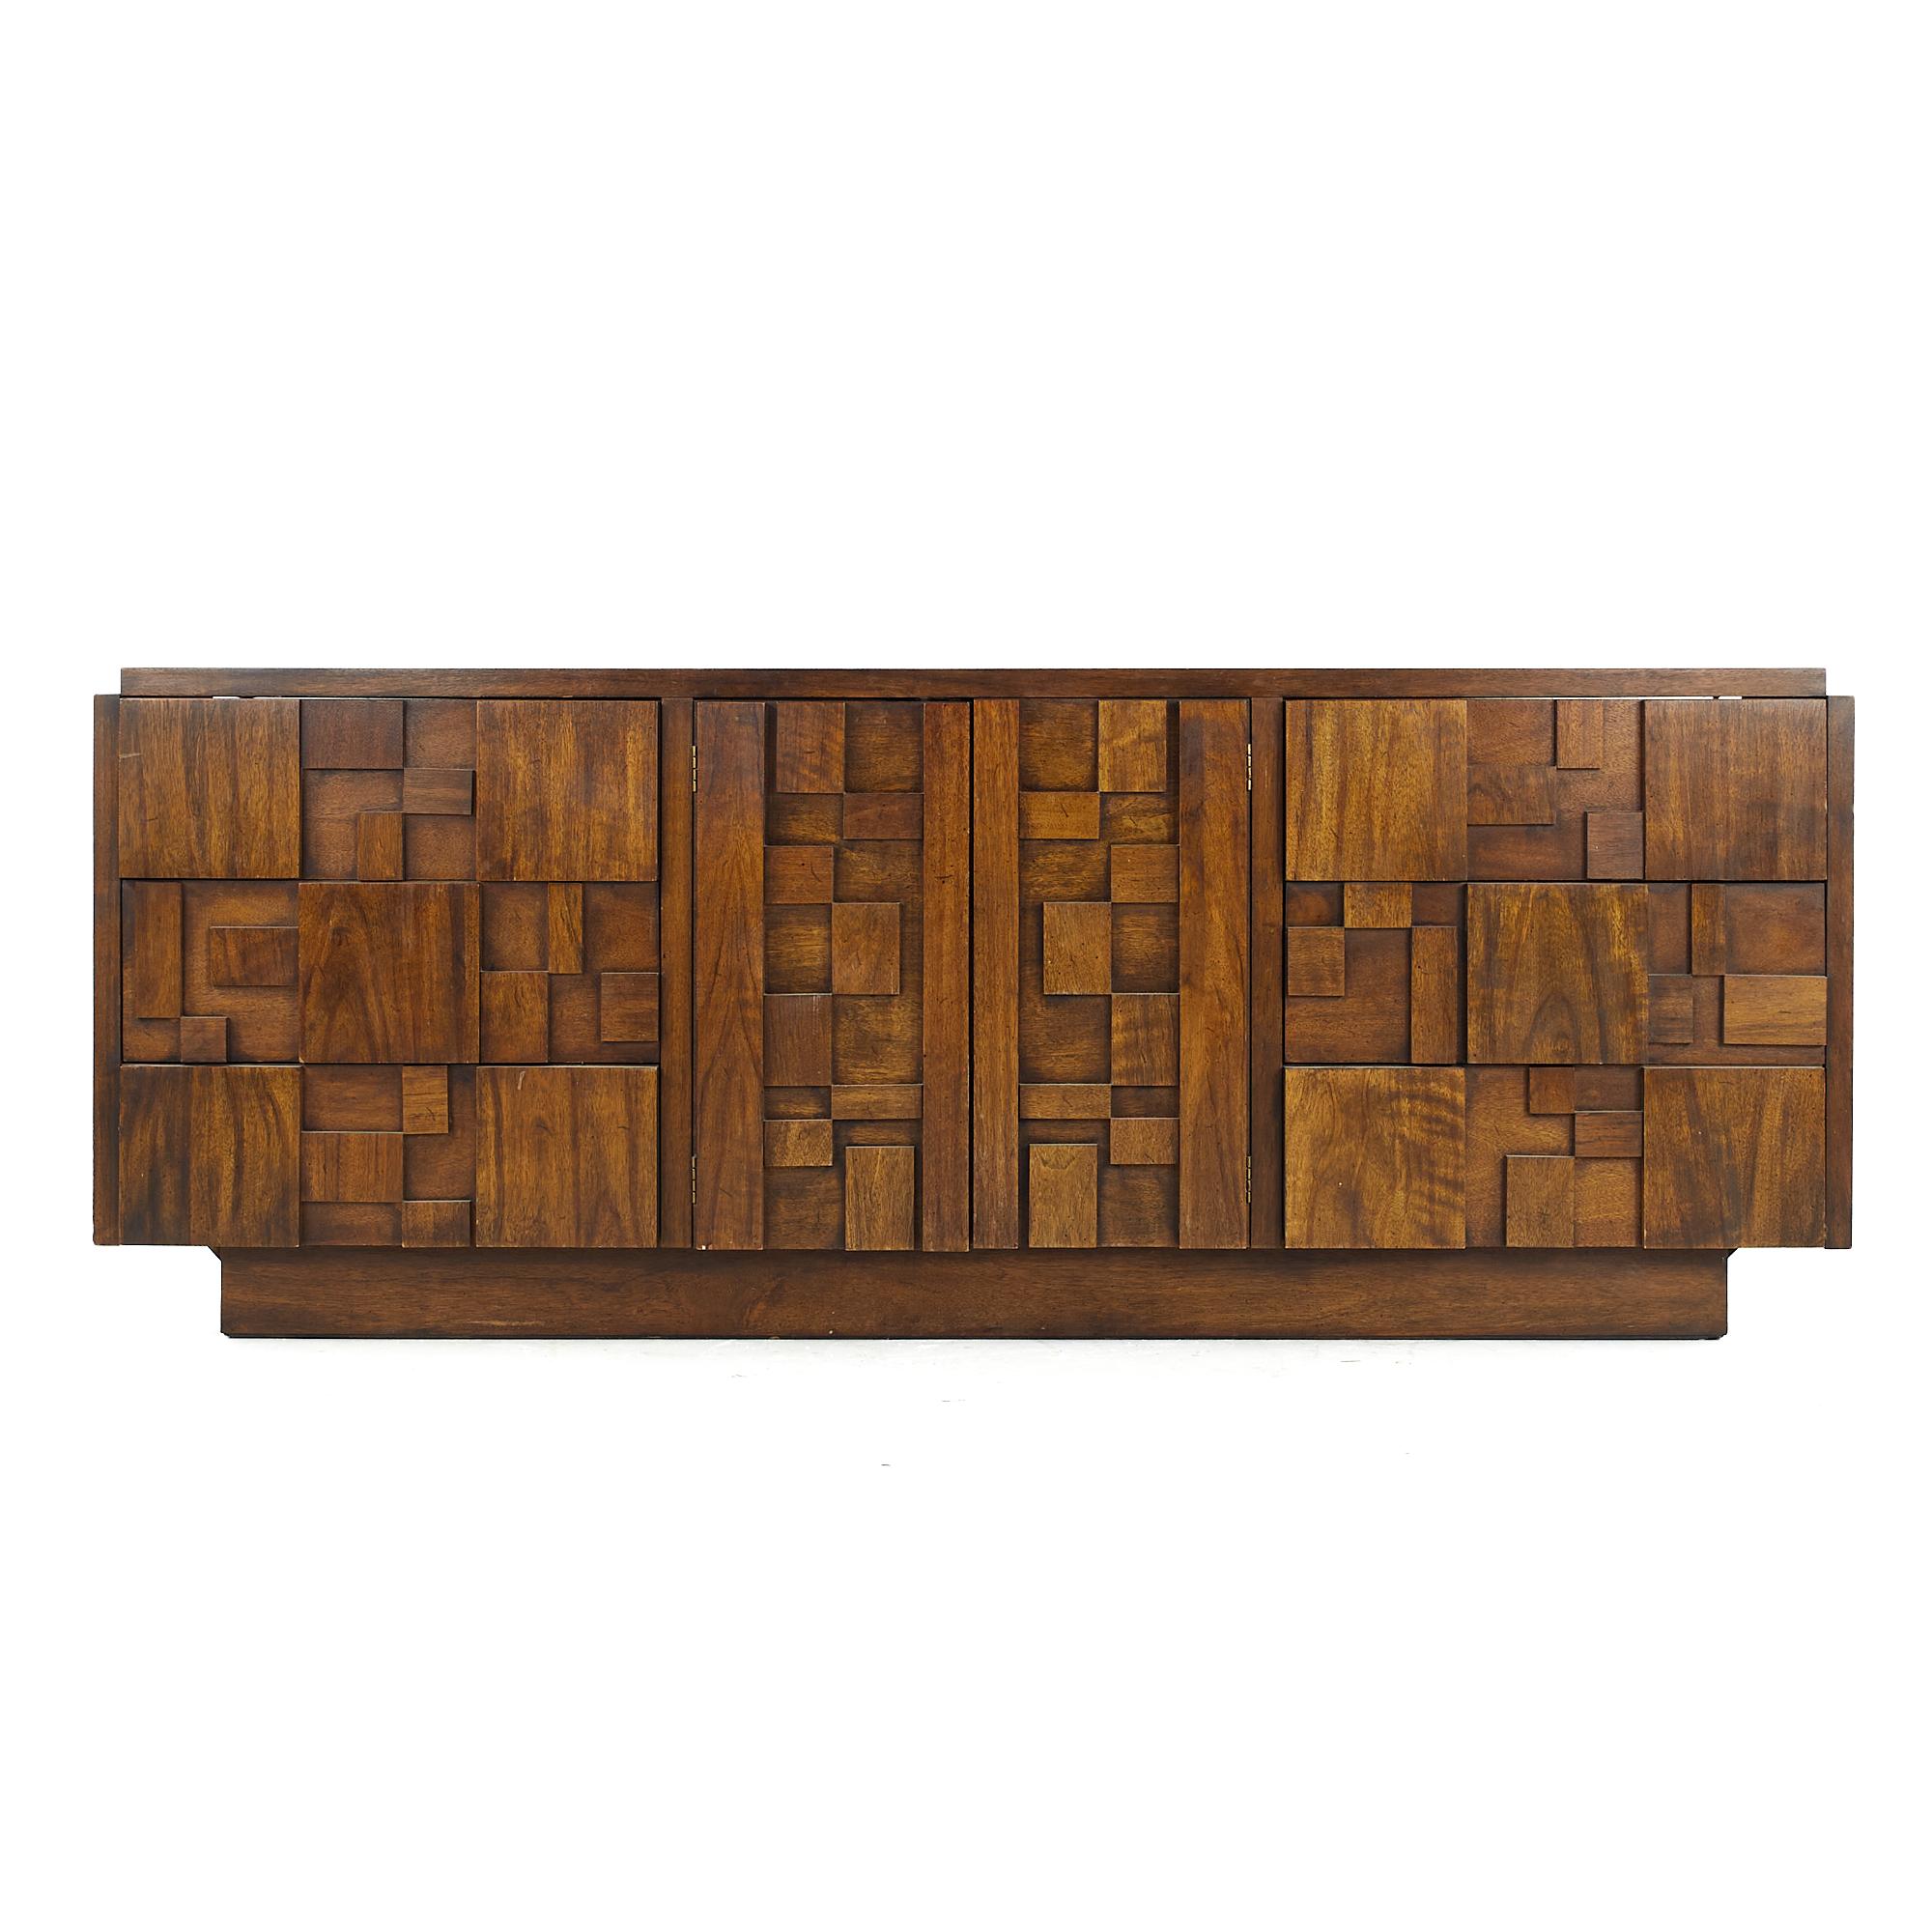 Lane Staccato Brutalist midcentury walnut lowboy 9 drawer dresser

This lowboy measures: 78 wide x 18.75 deep x 30 inches high

All pieces of furniture can be had in what we call restored vintage condition. That means the piece is restored upon